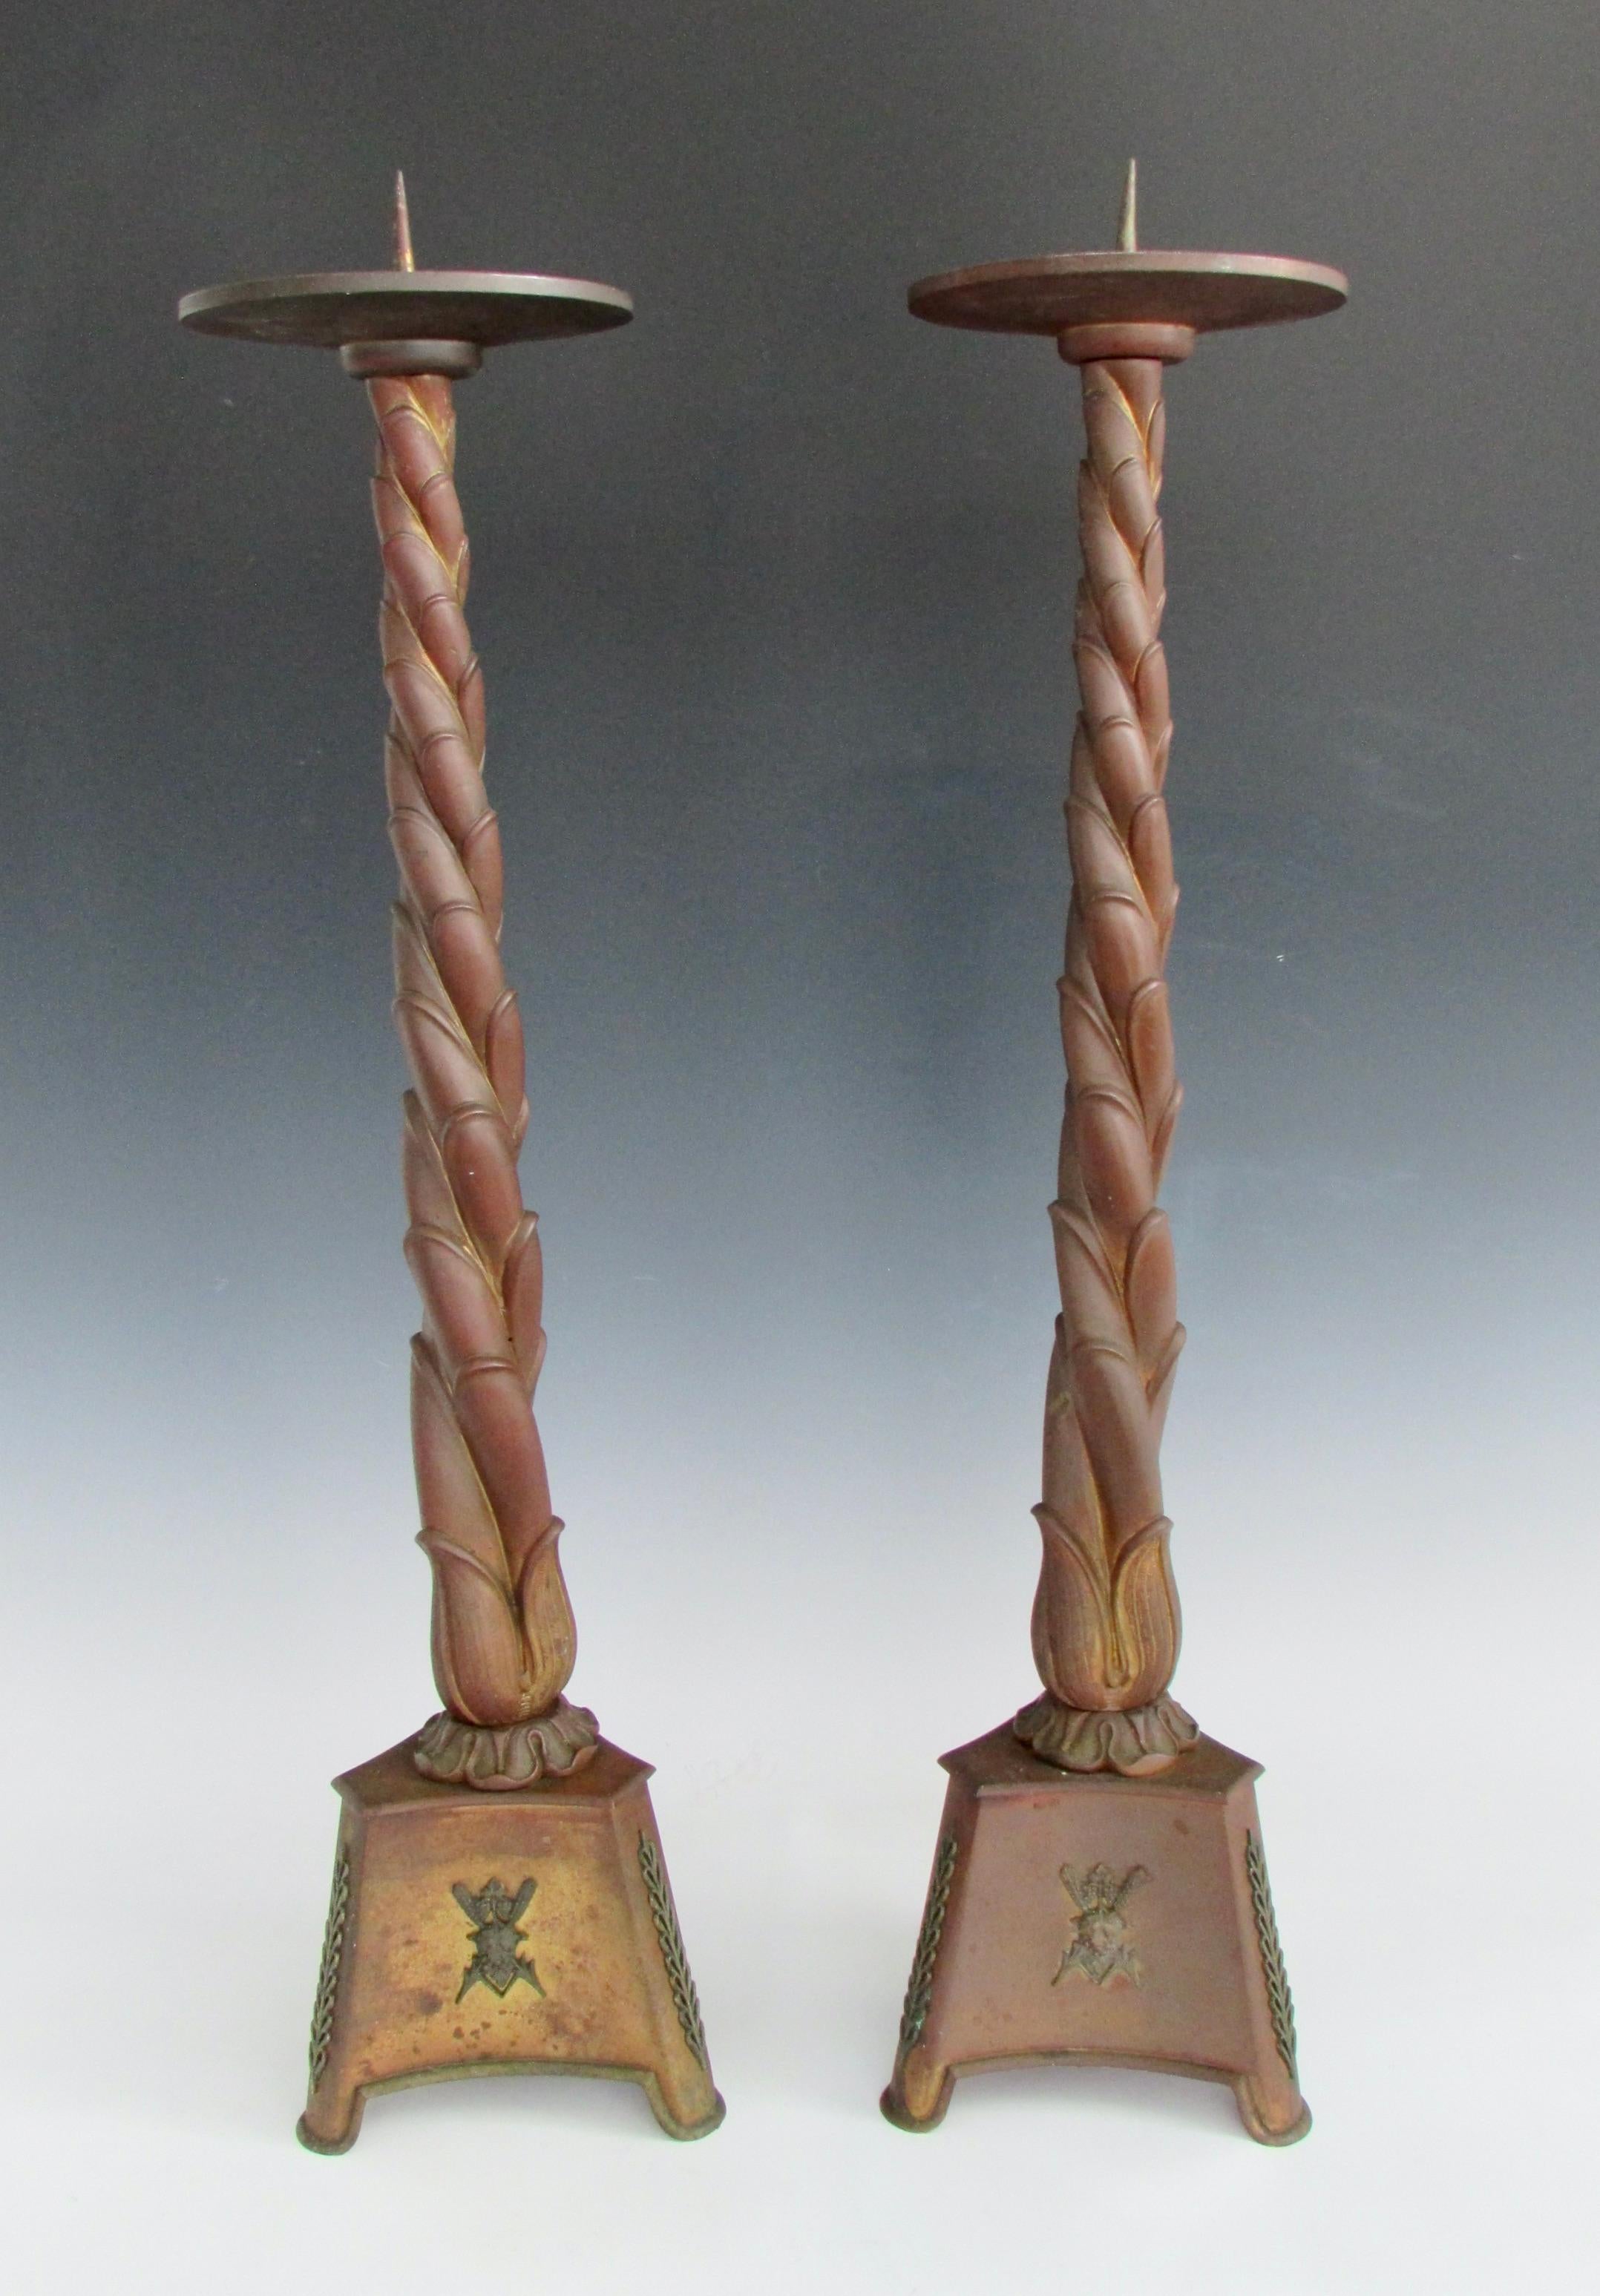 Pair of Tall Twist Column Bronze Gothic Candle Sticks In Good Condition For Sale In Ferndale, MI